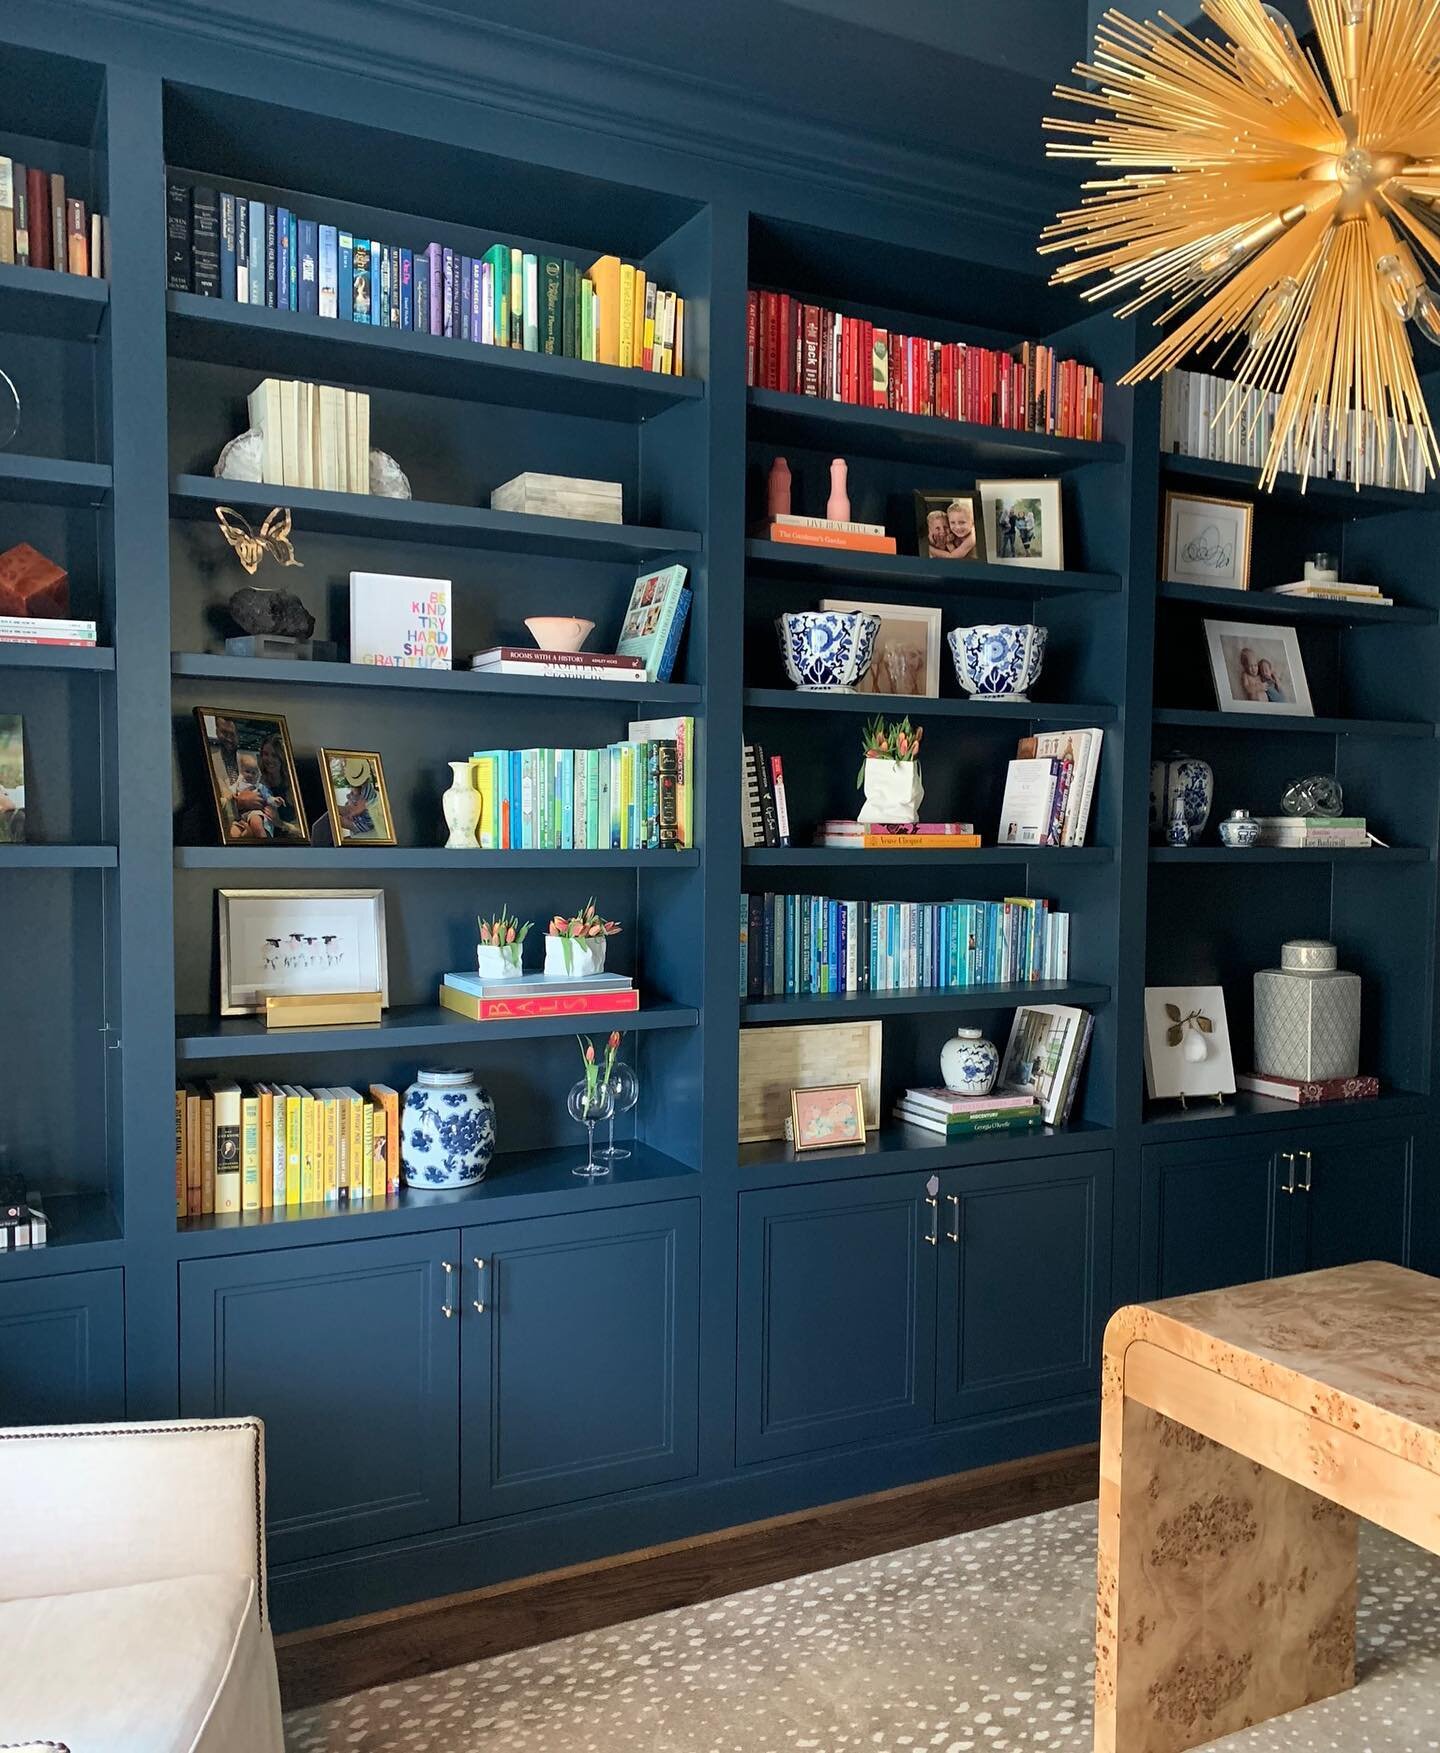 The perfect place for the Monday grind! #FHIMemorialI #office #bookshelves #interiordesign #francescaherrointeriors